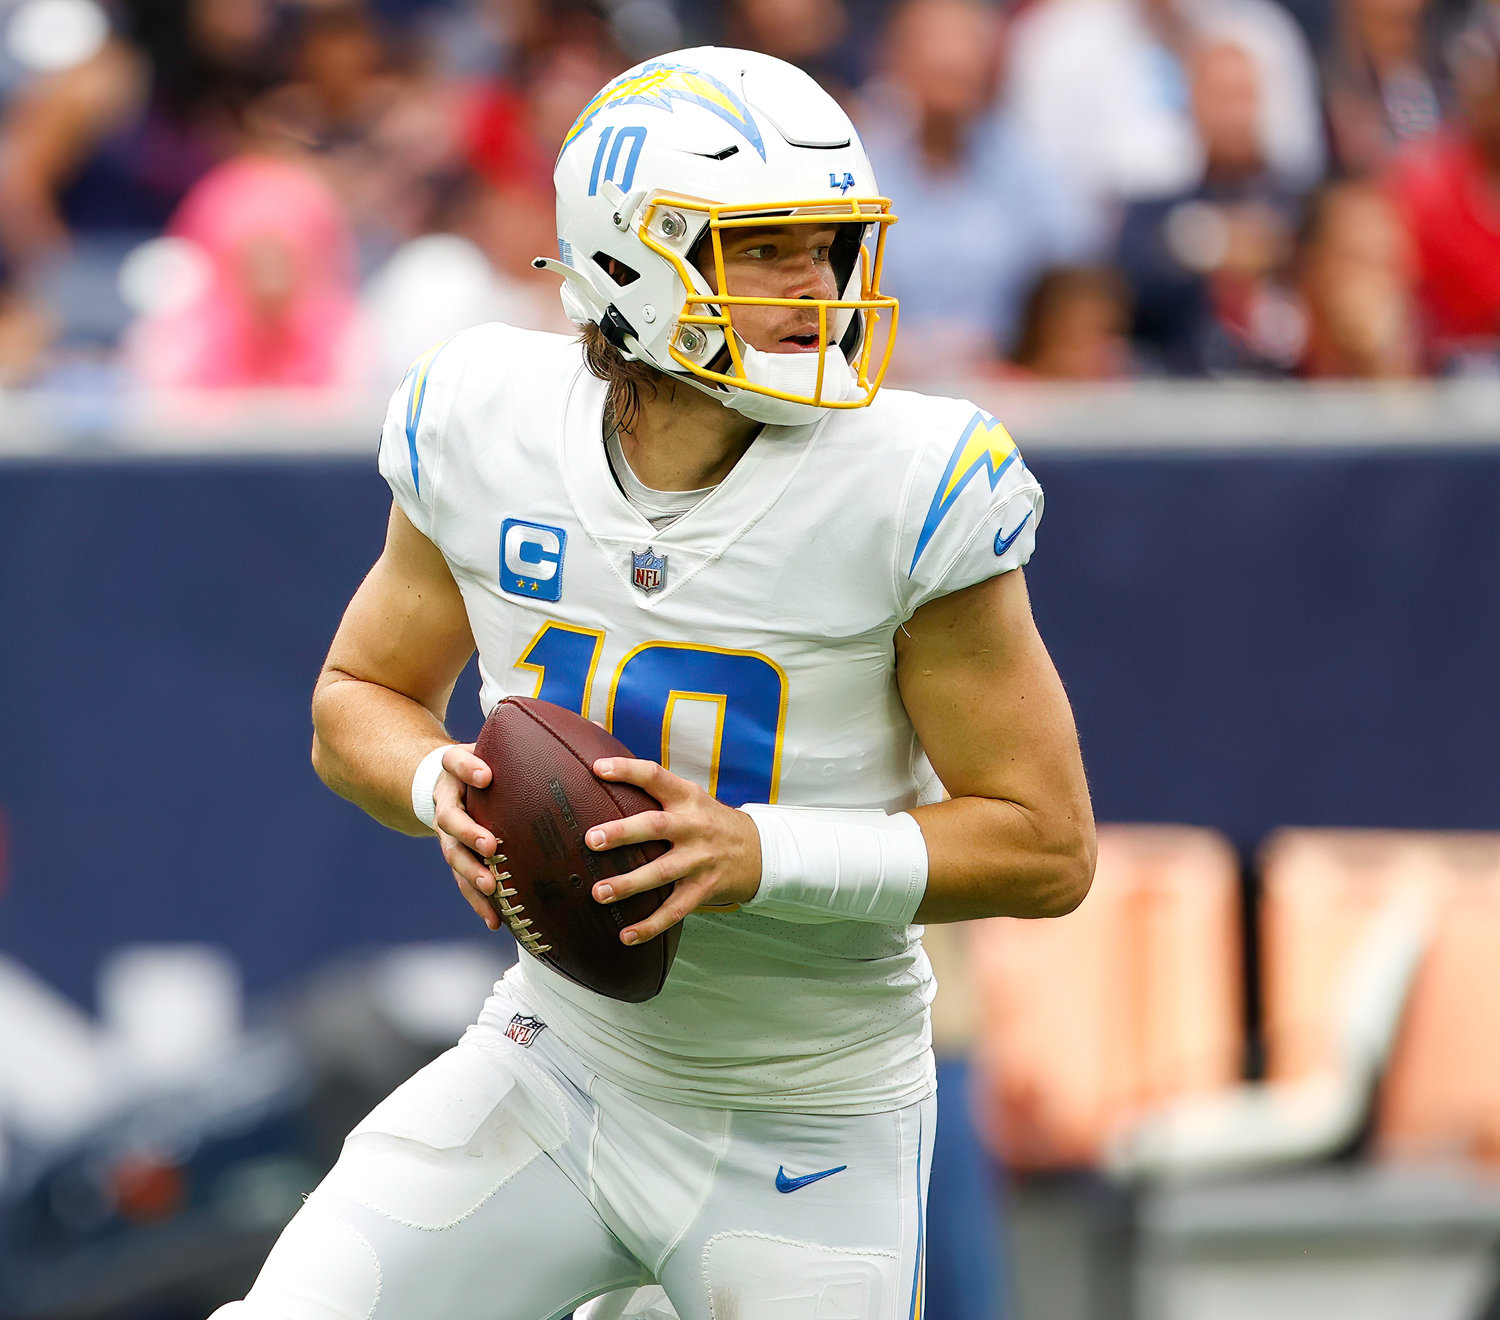 Chargers quarterback Justin Herbert (10) looks to pass during an NFL game between the Texans and the Chargers on Oct. 2, 2022 in Houston. The Chargers won 34-24.